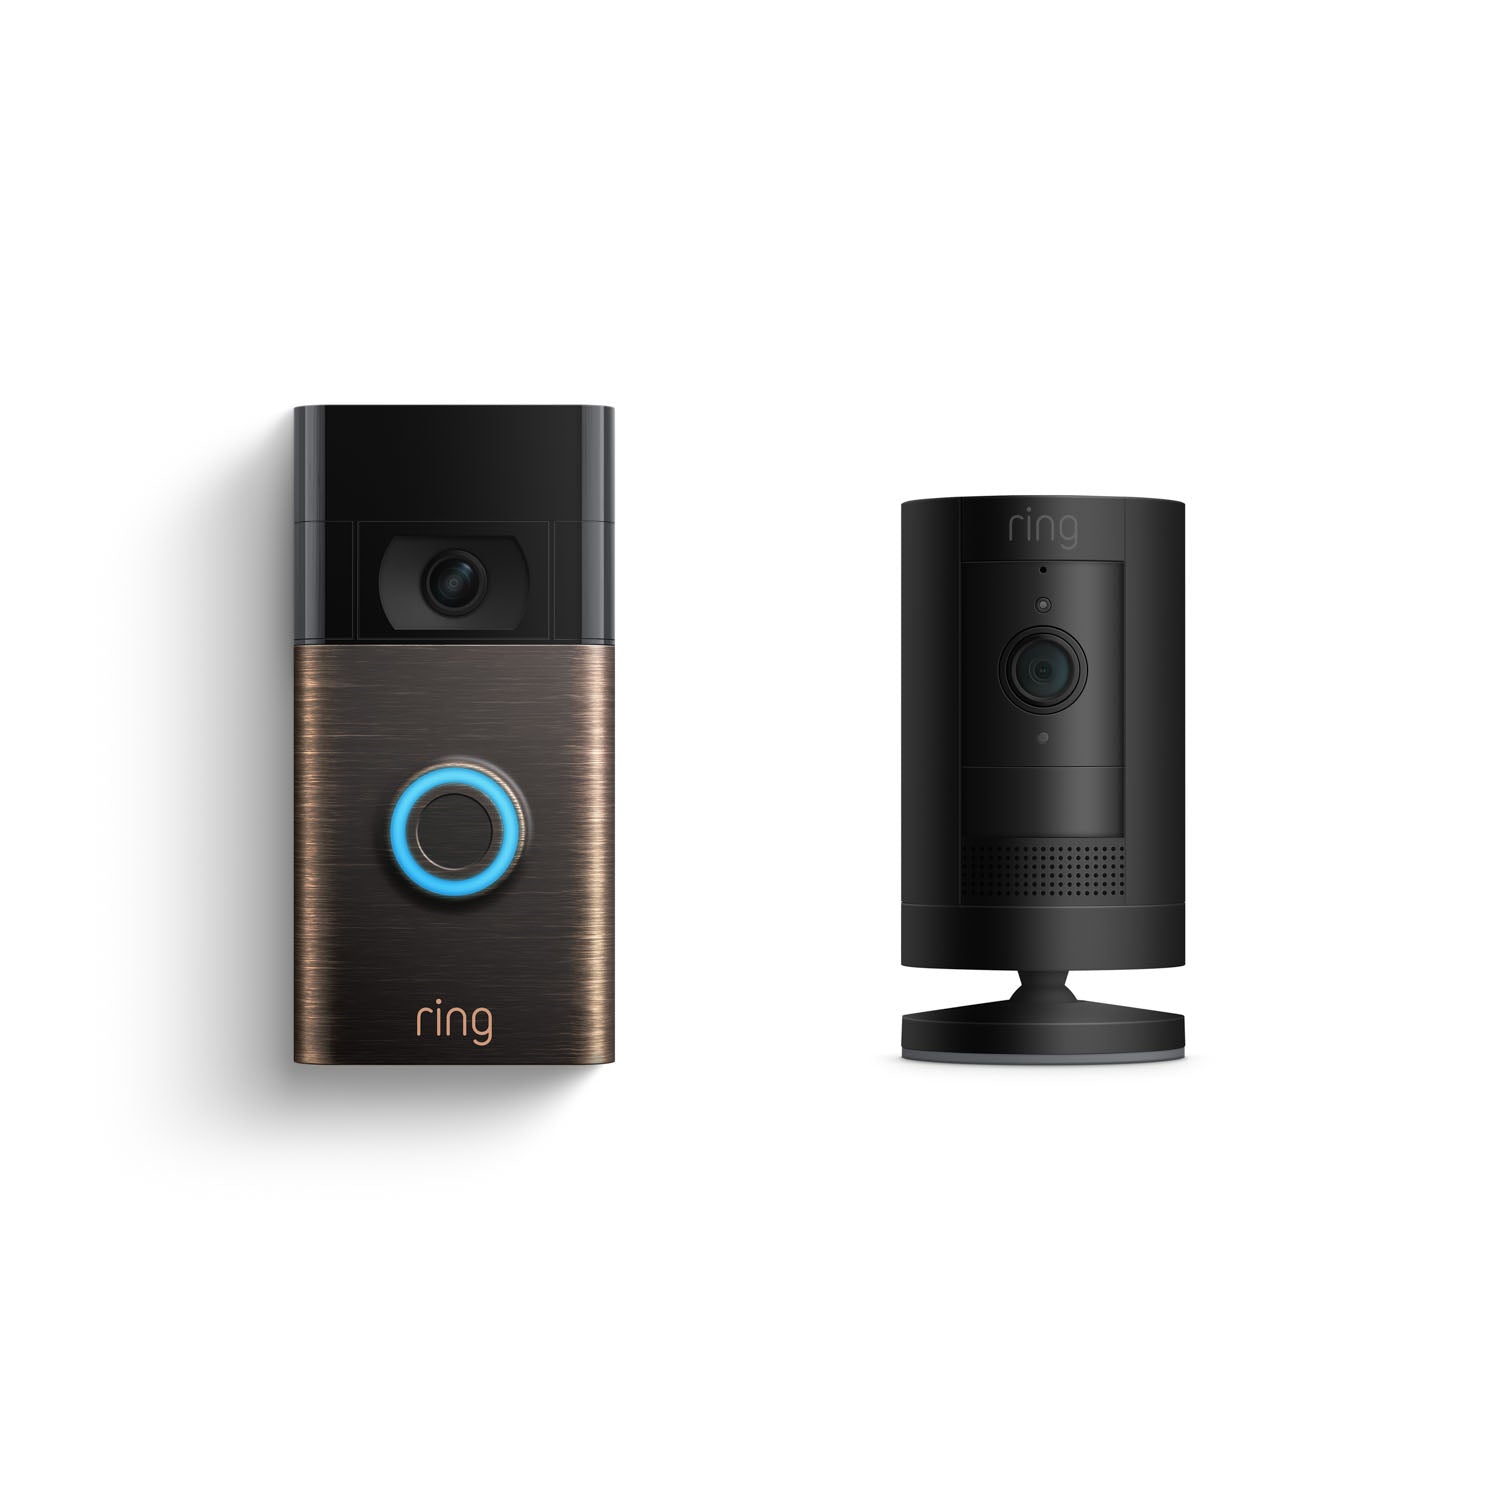 Connected Basic Kit (Video Doorbell (2nd Generation) + Stick Up Cam Battery) - Bronze + Black:Connected Basic Kit (Video Doorbell (2nd Generation) + Stick Up Cam Battery)